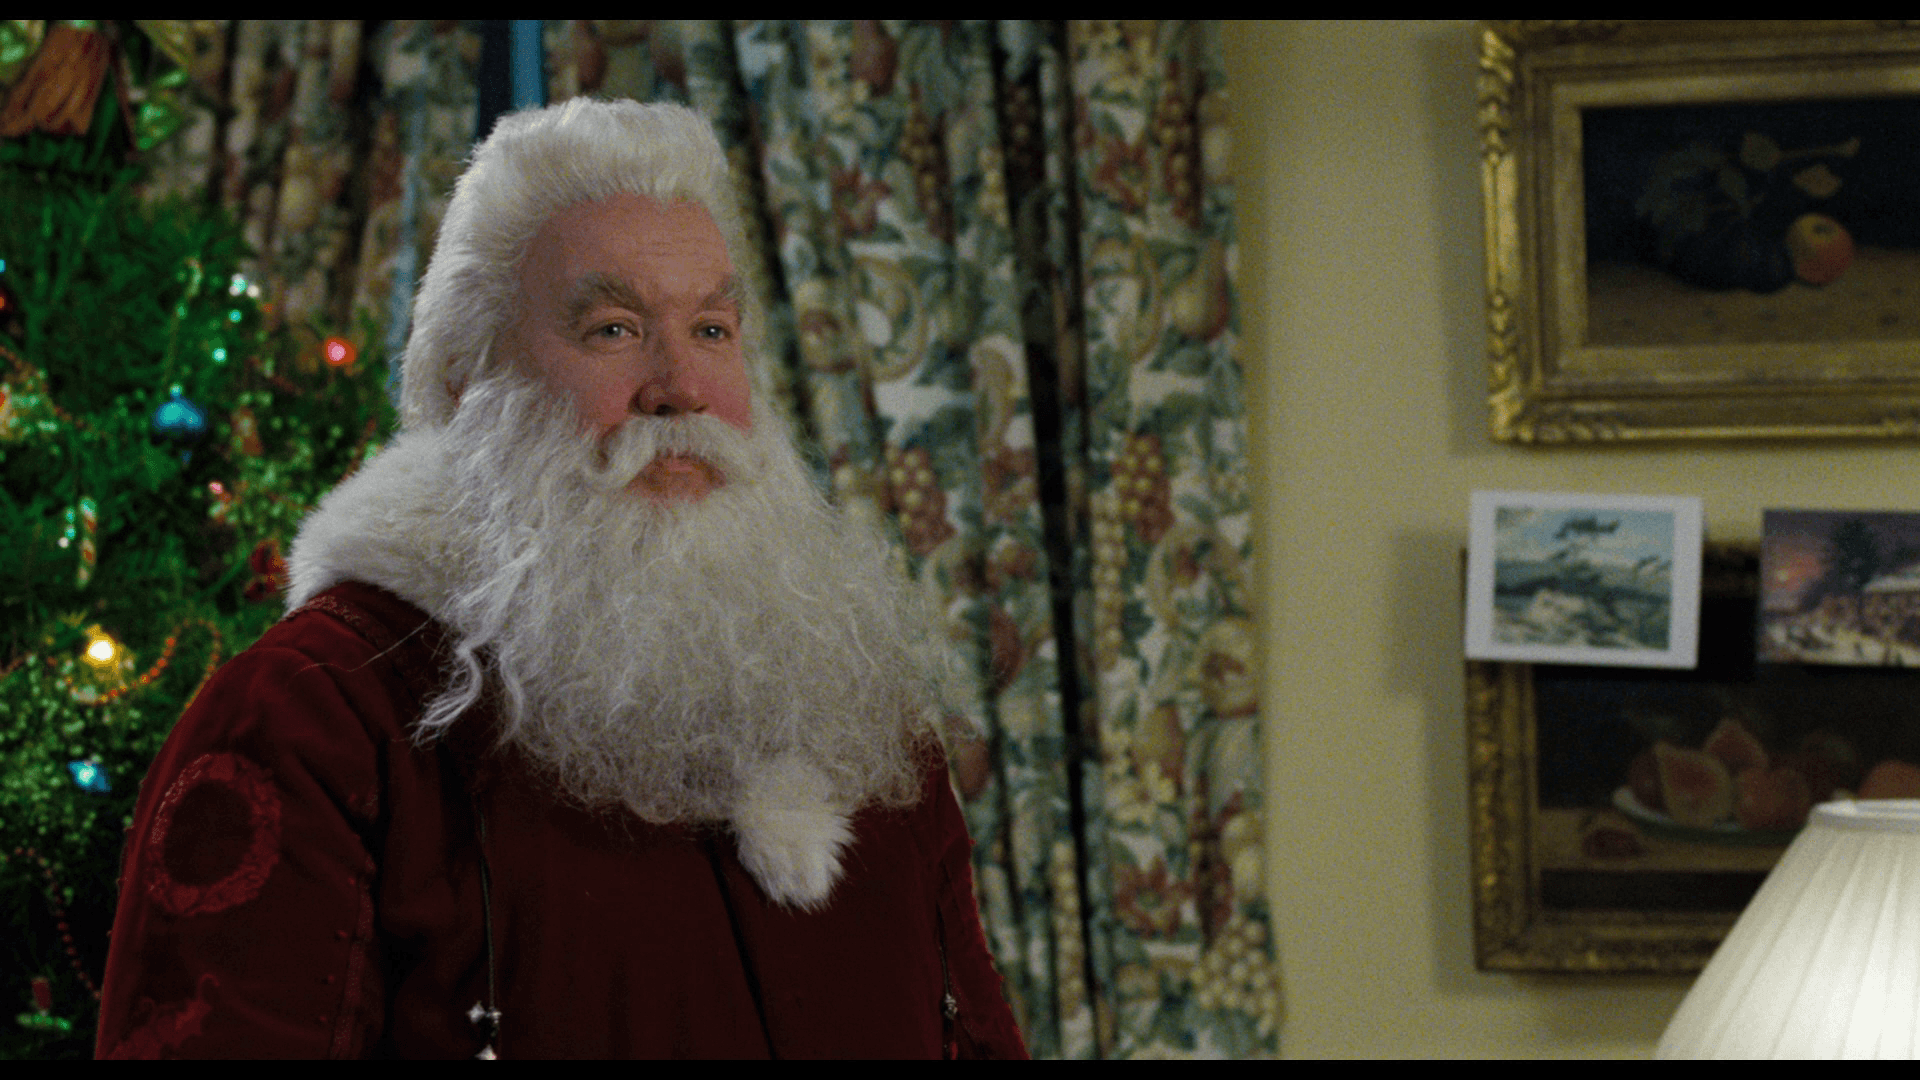 The Santa Clause: The Complete 3 Movie Collection (Blu Ray), DVD